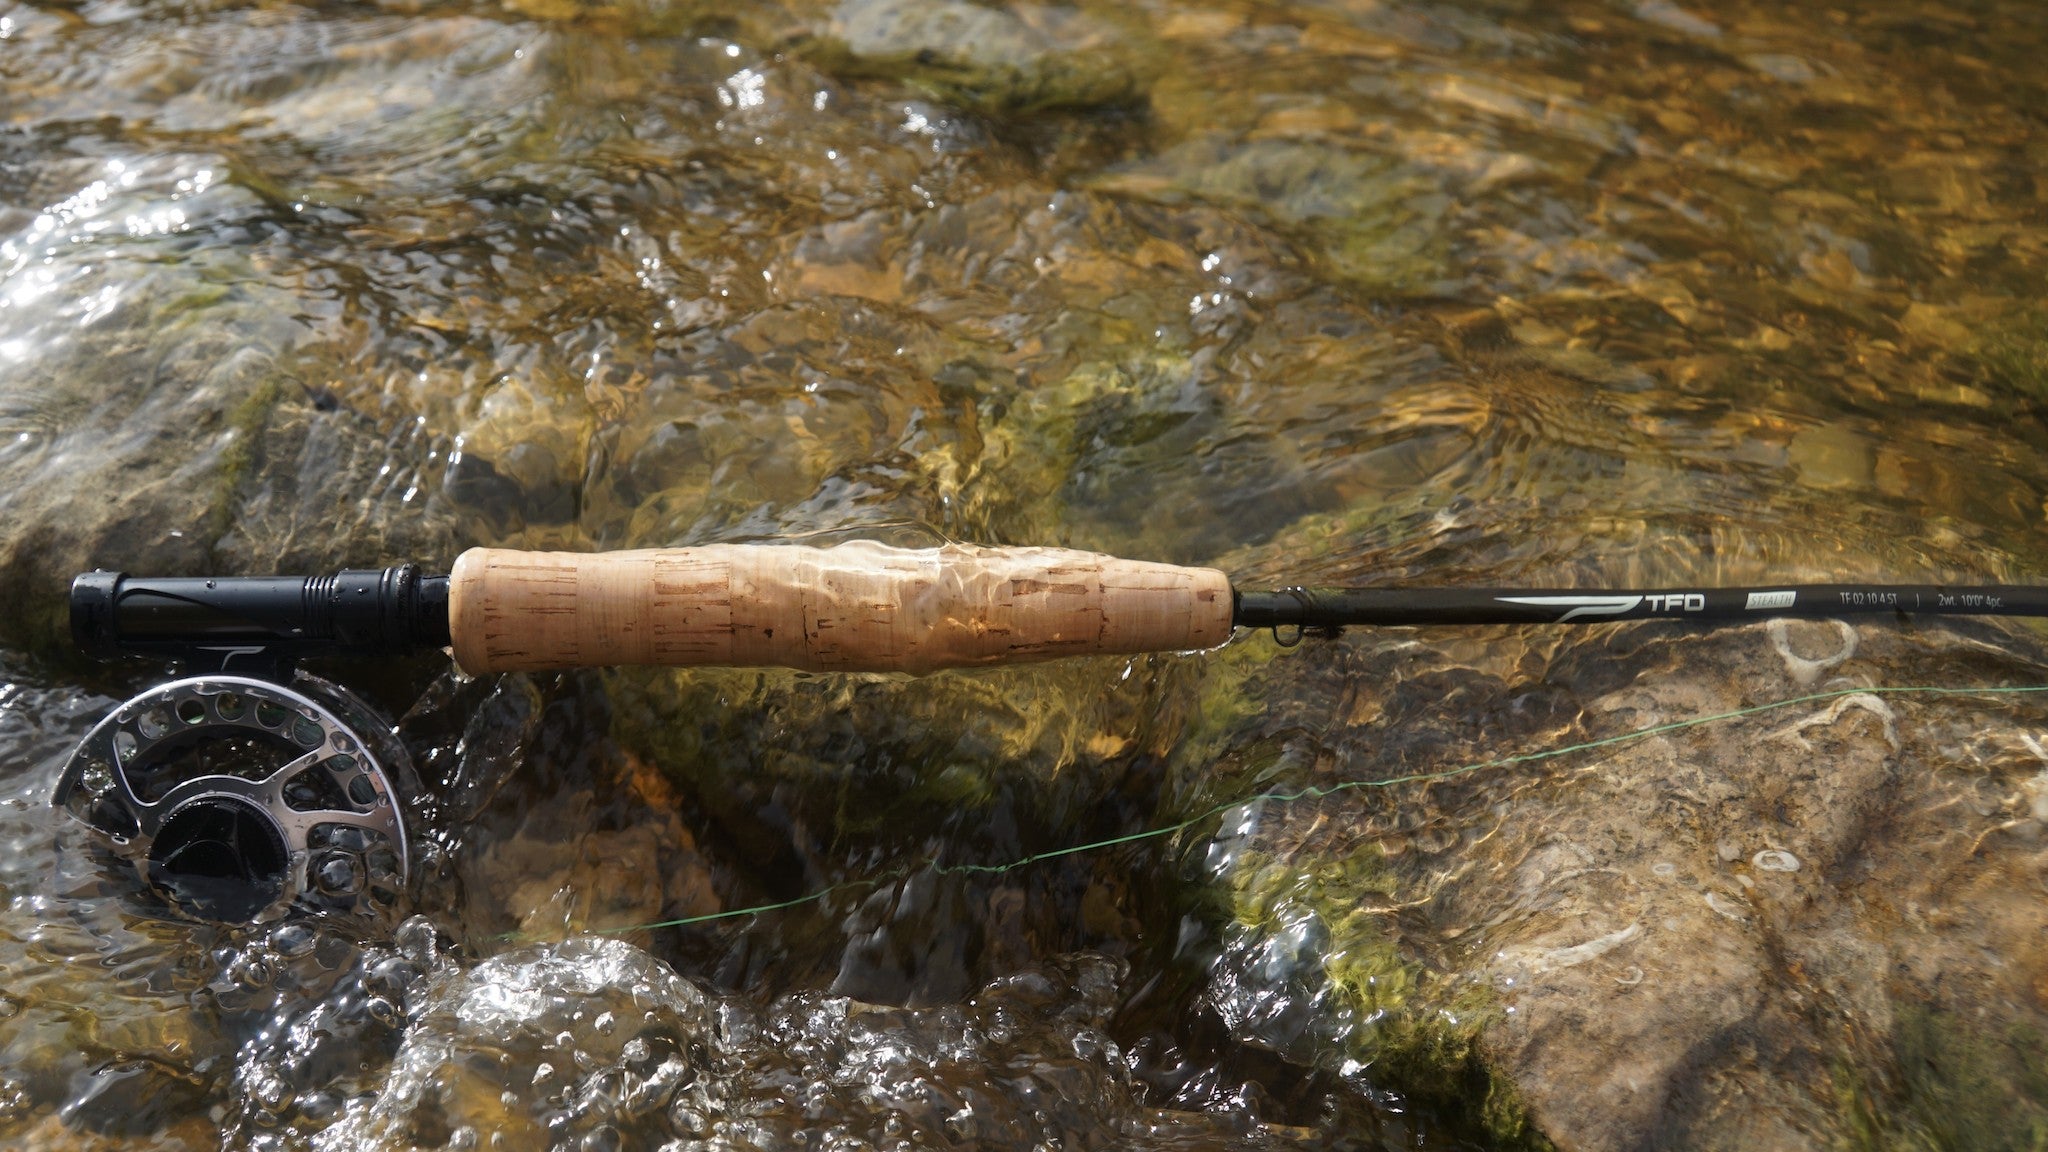 TFO Stealth Fly Rod